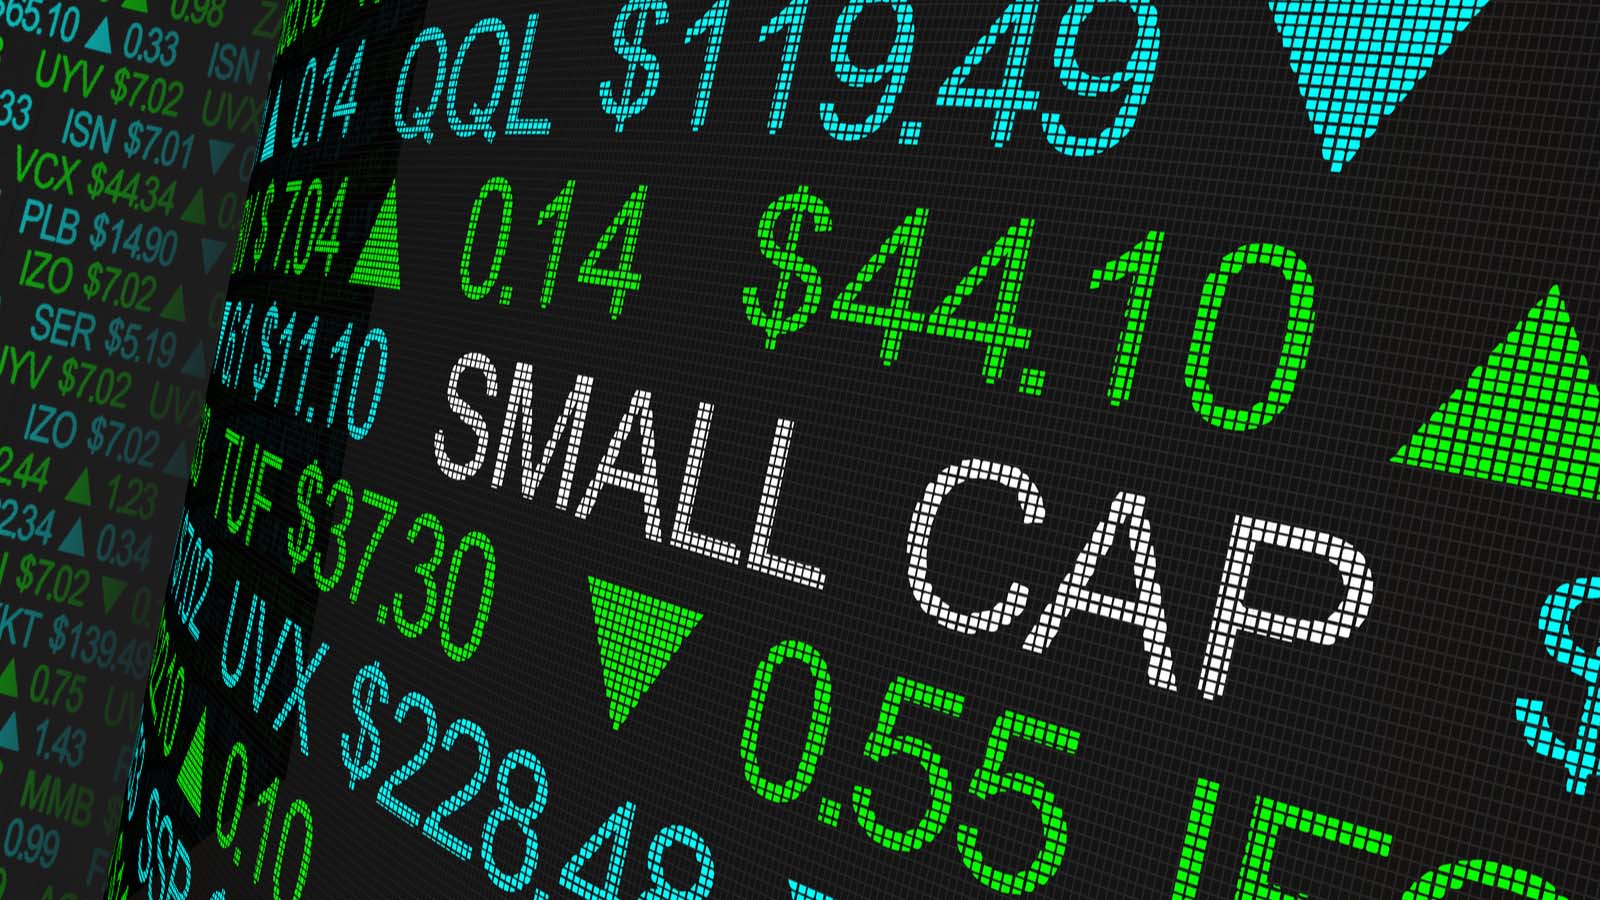 a ticker board that says "SMALL CAP" among various ticker increases. represents small-cap stocks to buy